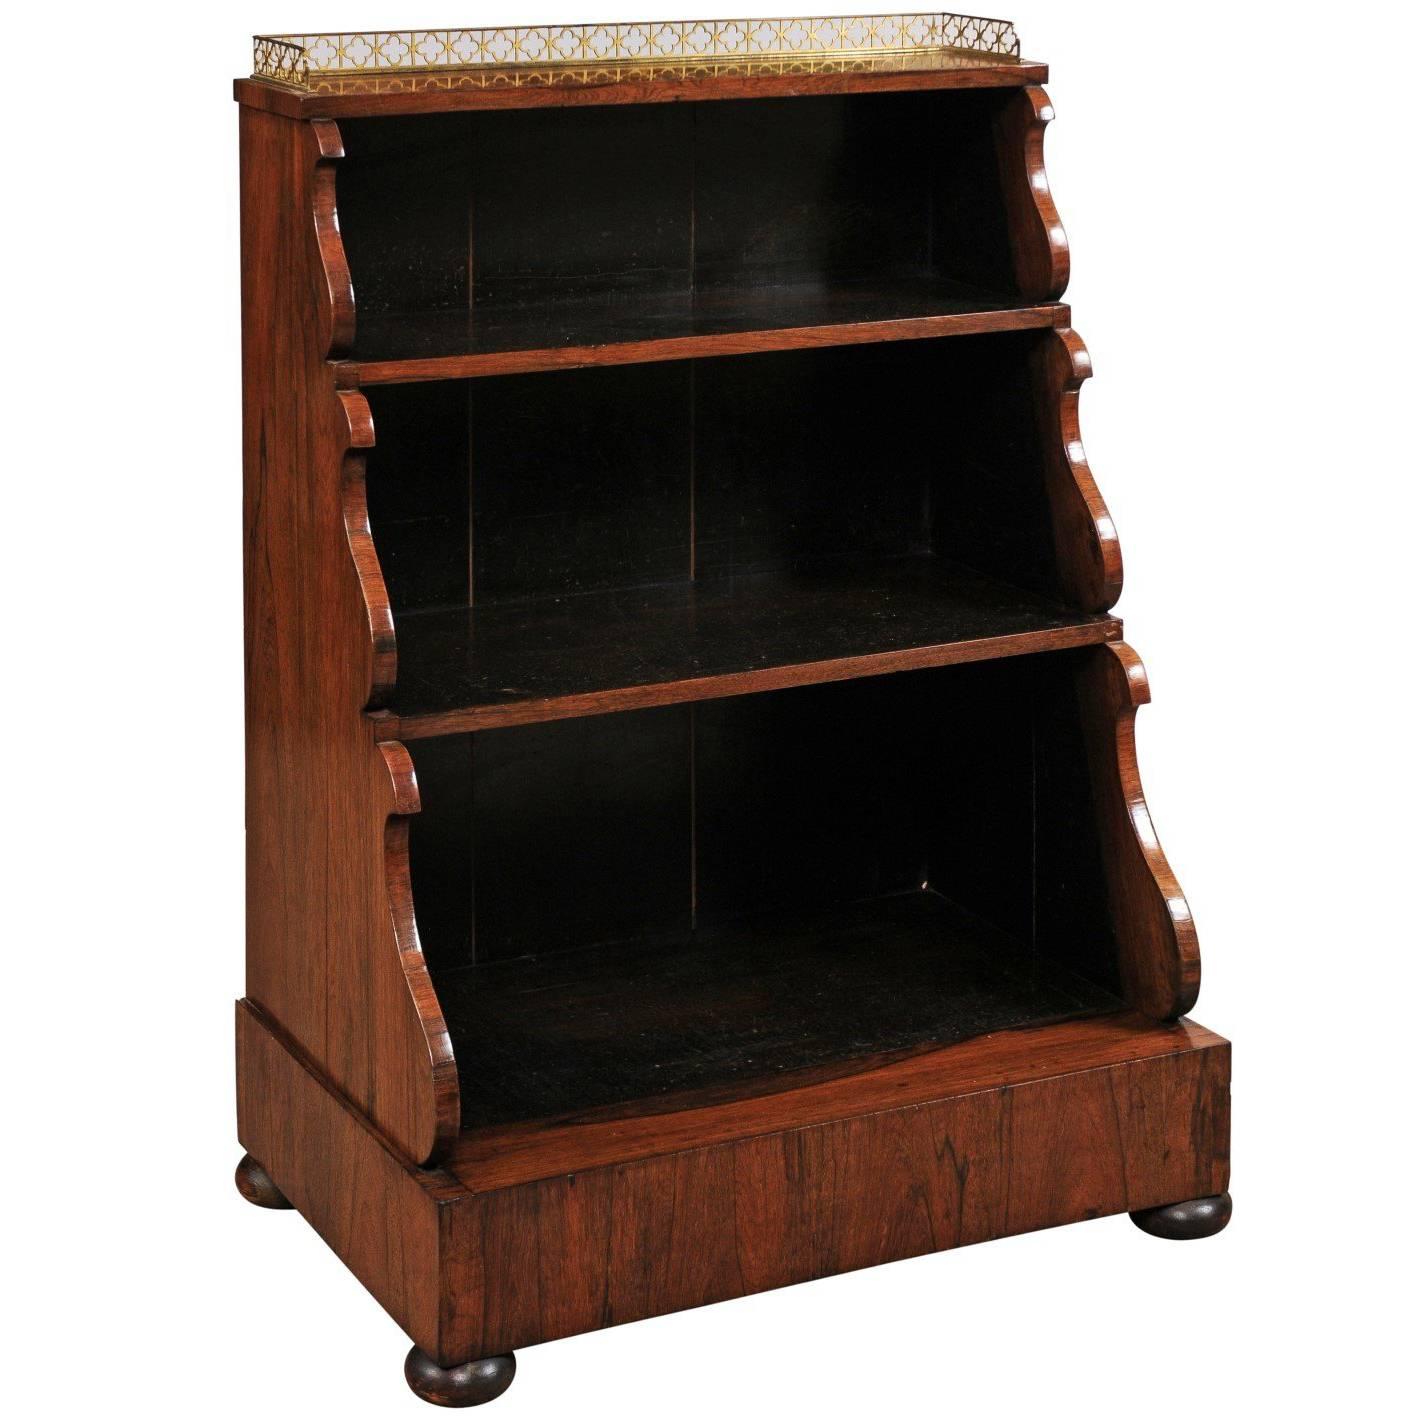 English Regency Petite Waterfall Bookcase in Rosewood, Early 19th Century